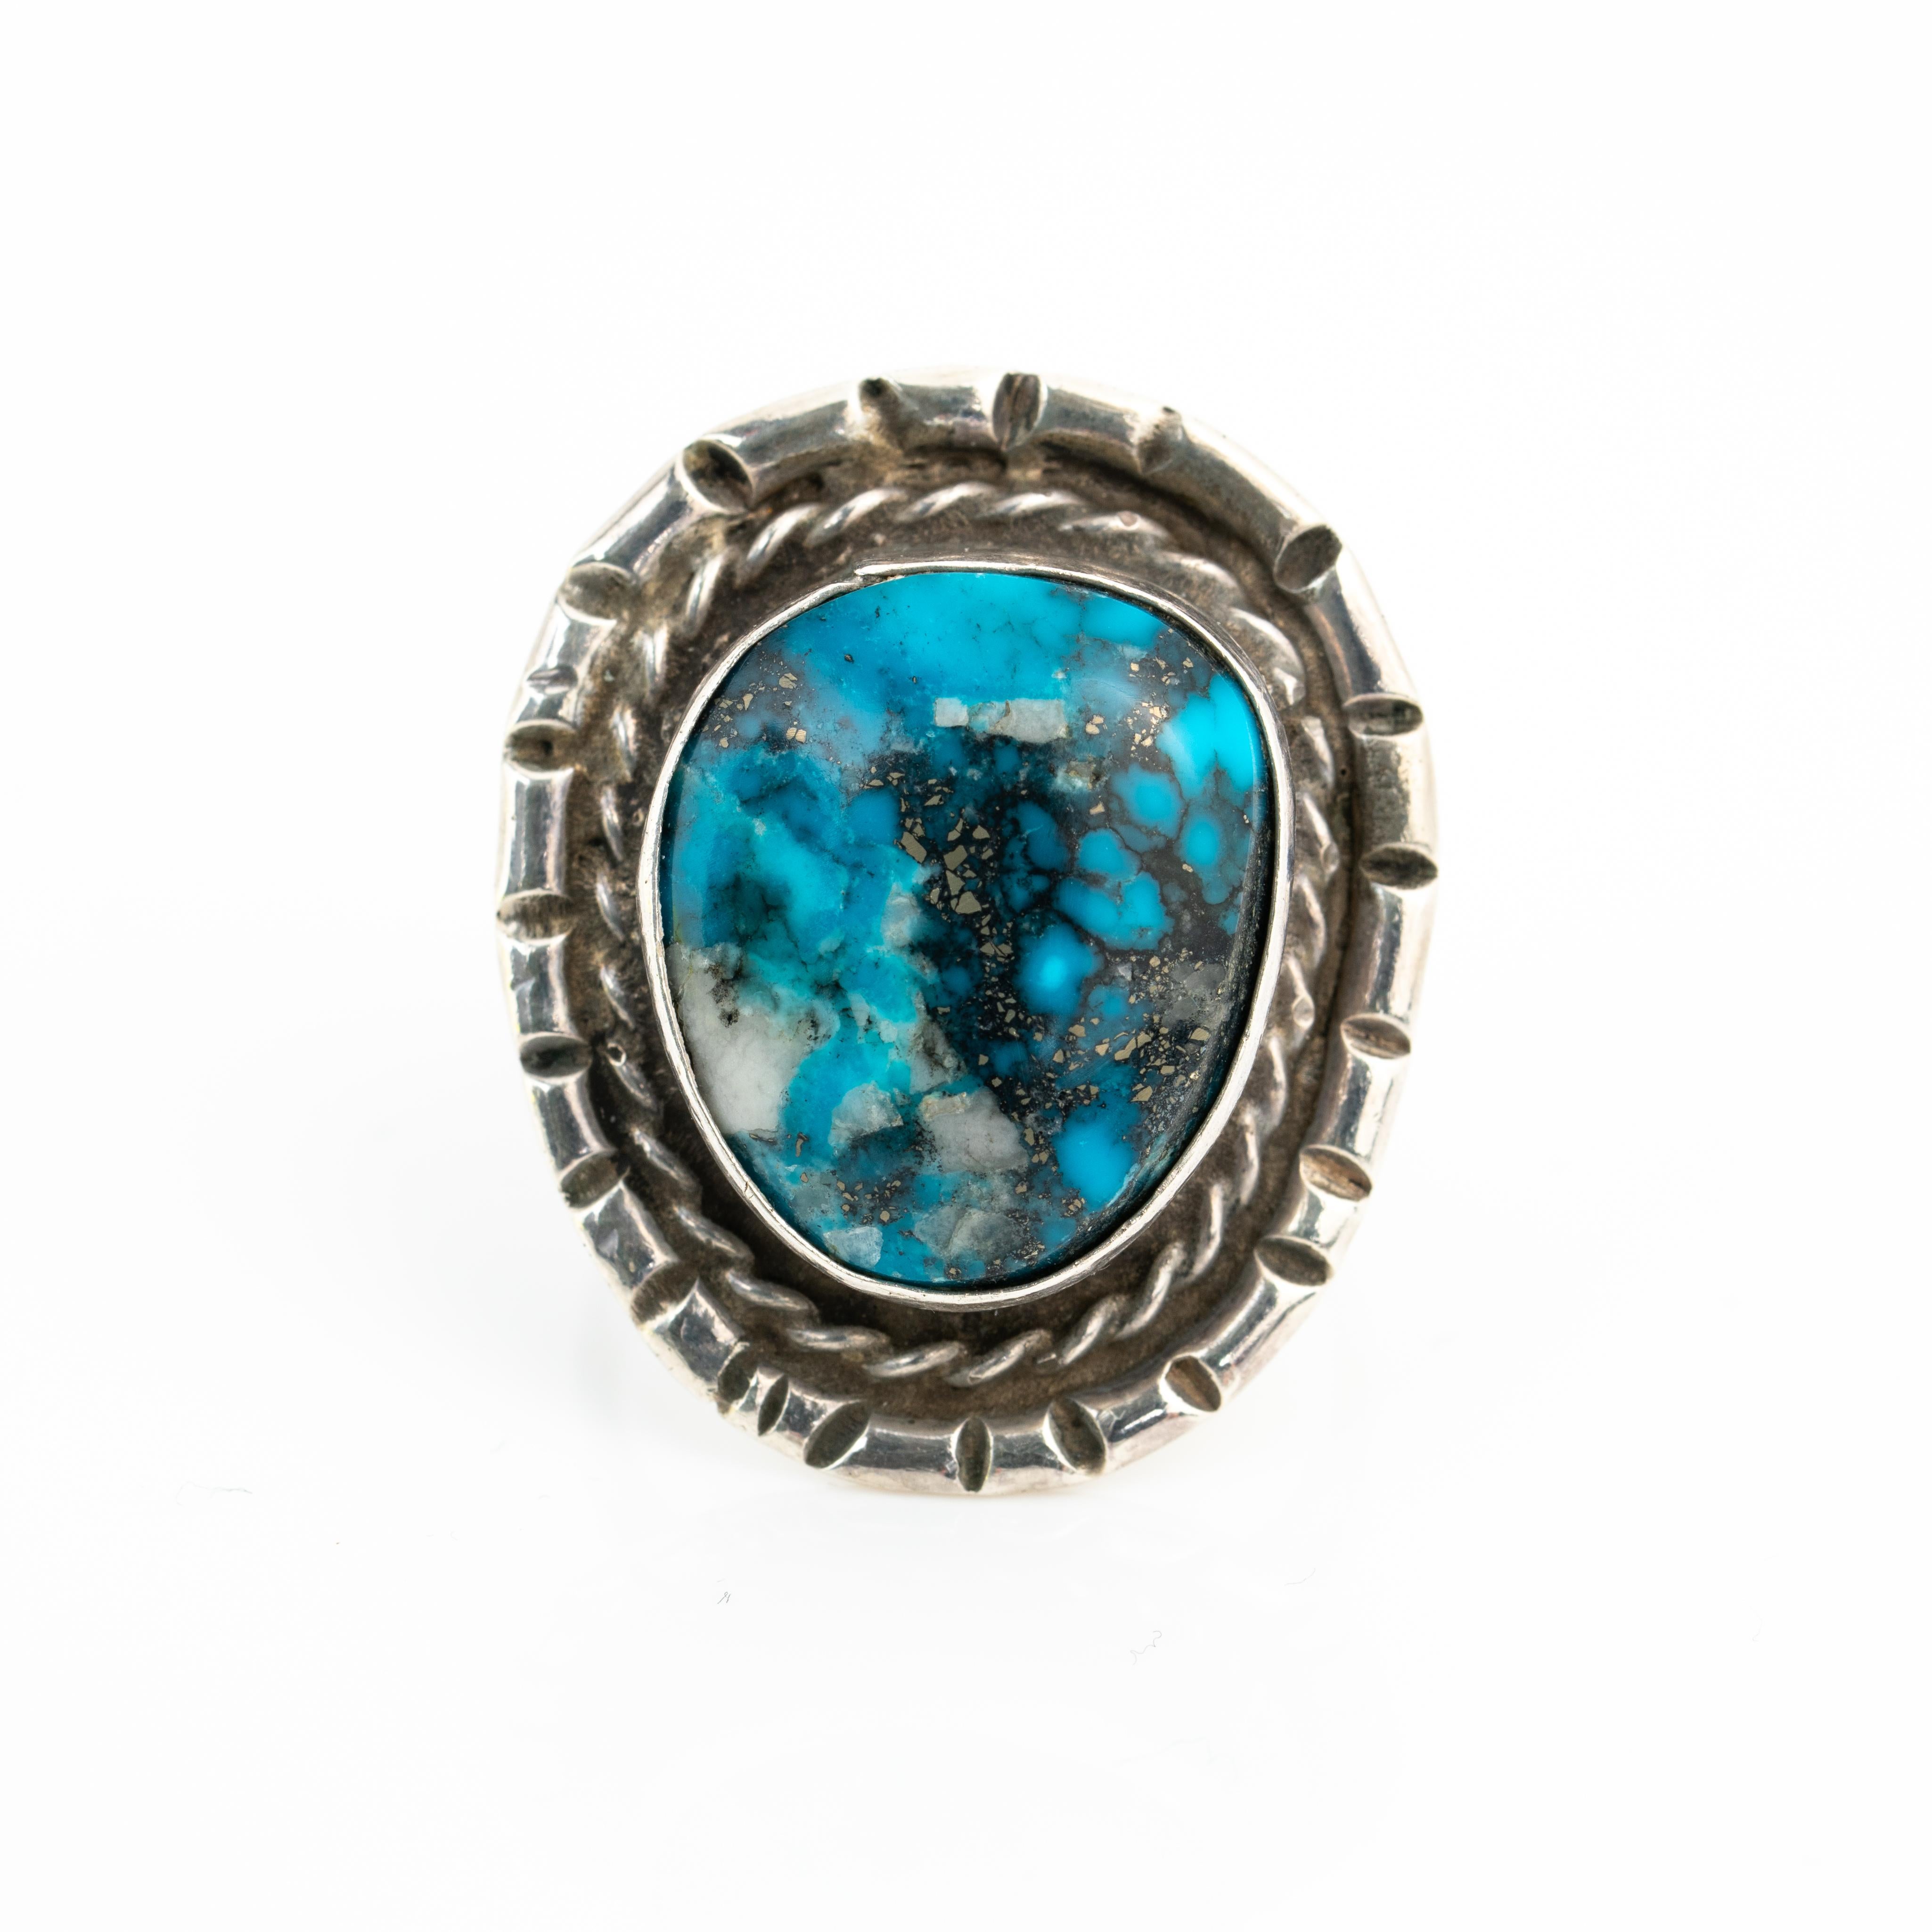 Cabochon Vintage Navajo Native American Silver and Apache Blue Turquoise Ring